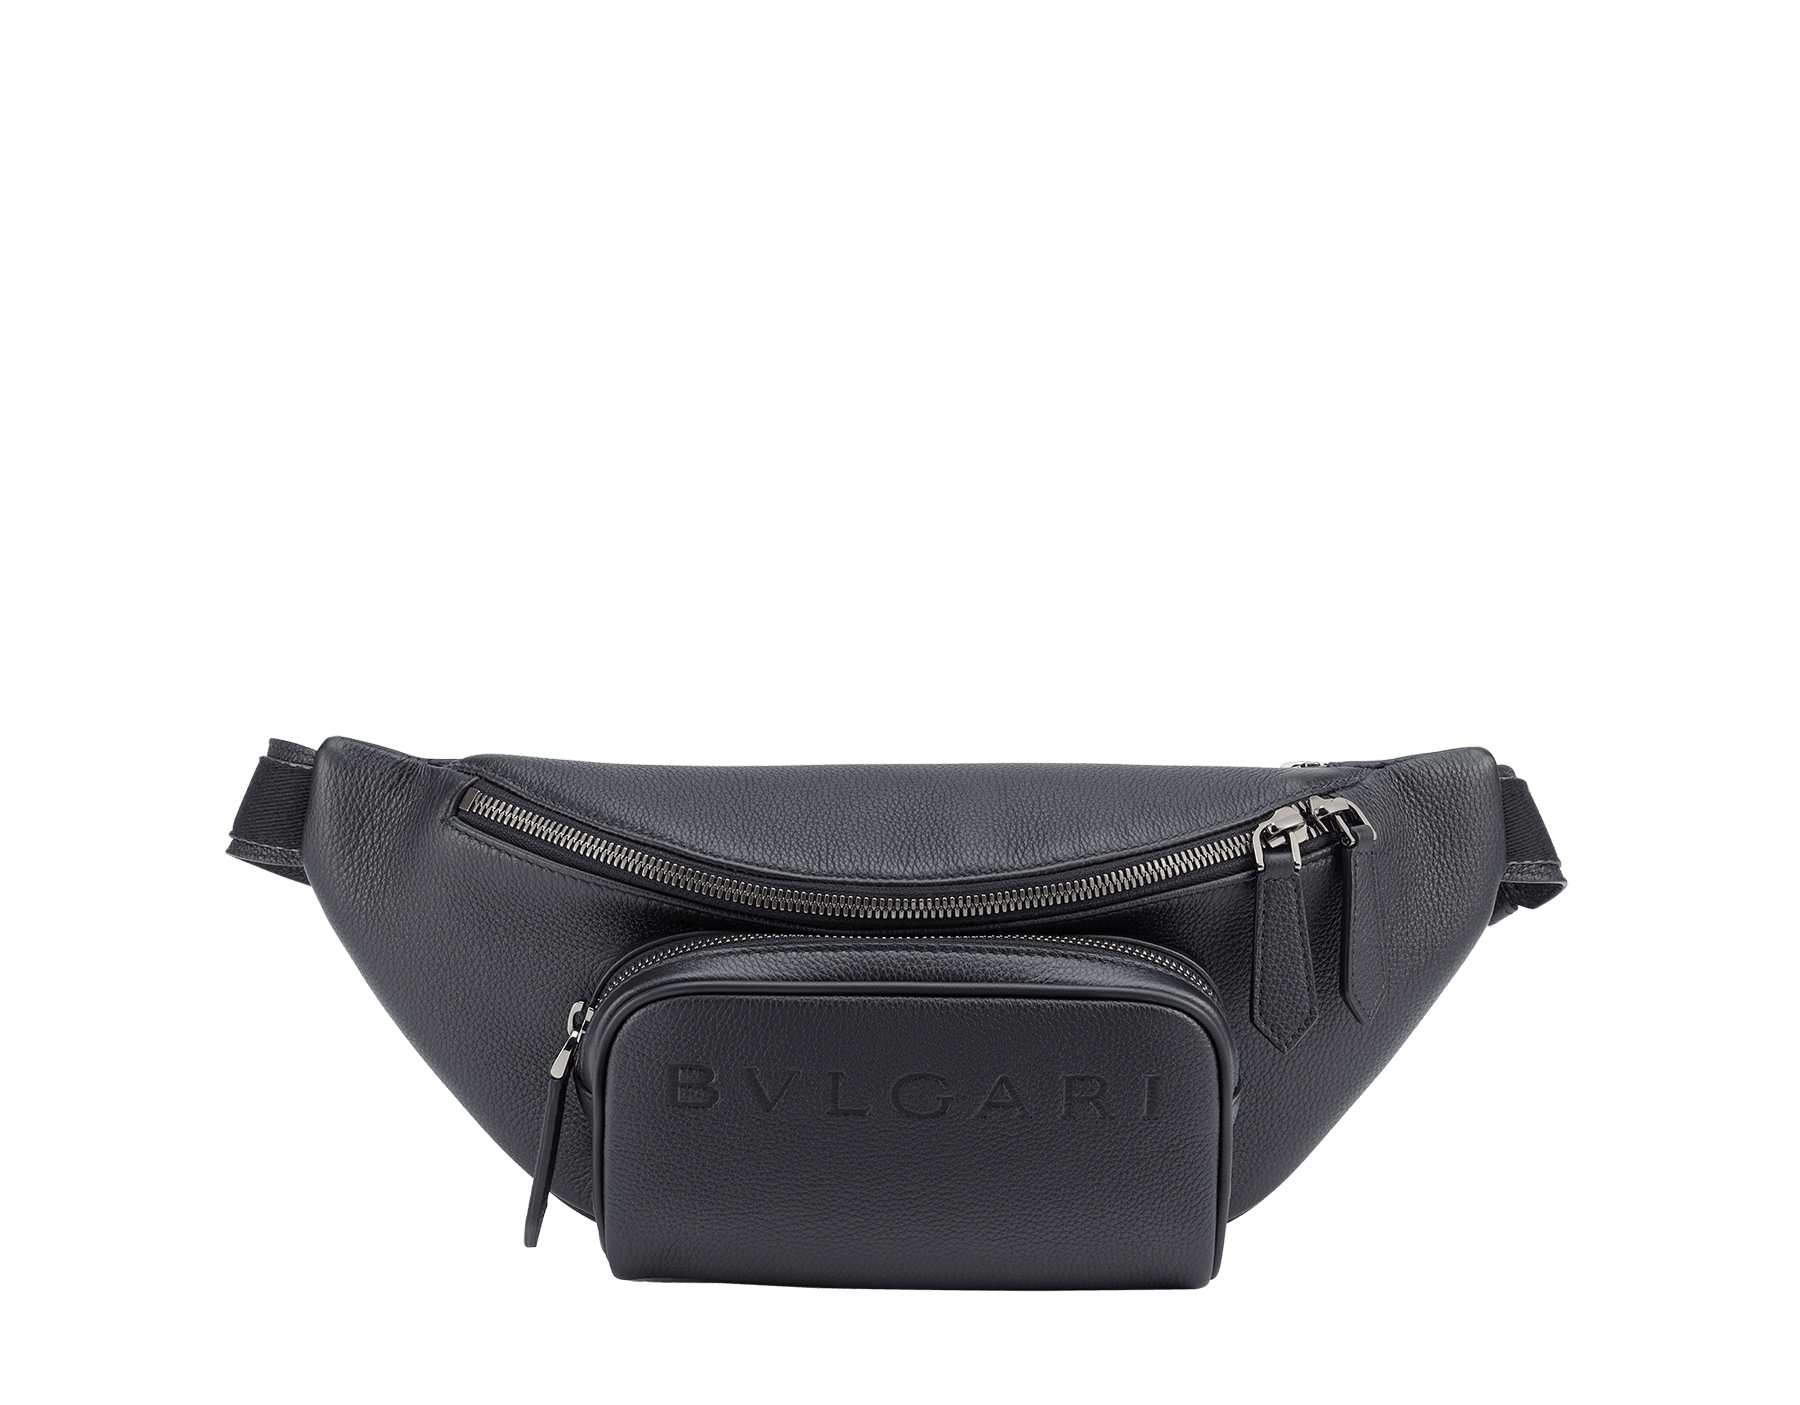 BULGARI Man small belt bag in Olympian sapphire blue smooth and grainy metal-free calf leather with Olympian sapphire blue regenerated nylon (ECONYL®) lining. Dark ruthenium-plated brass hardware, hot stamped BULGARI logo and zipped closure. BMA-1209-CL image 1